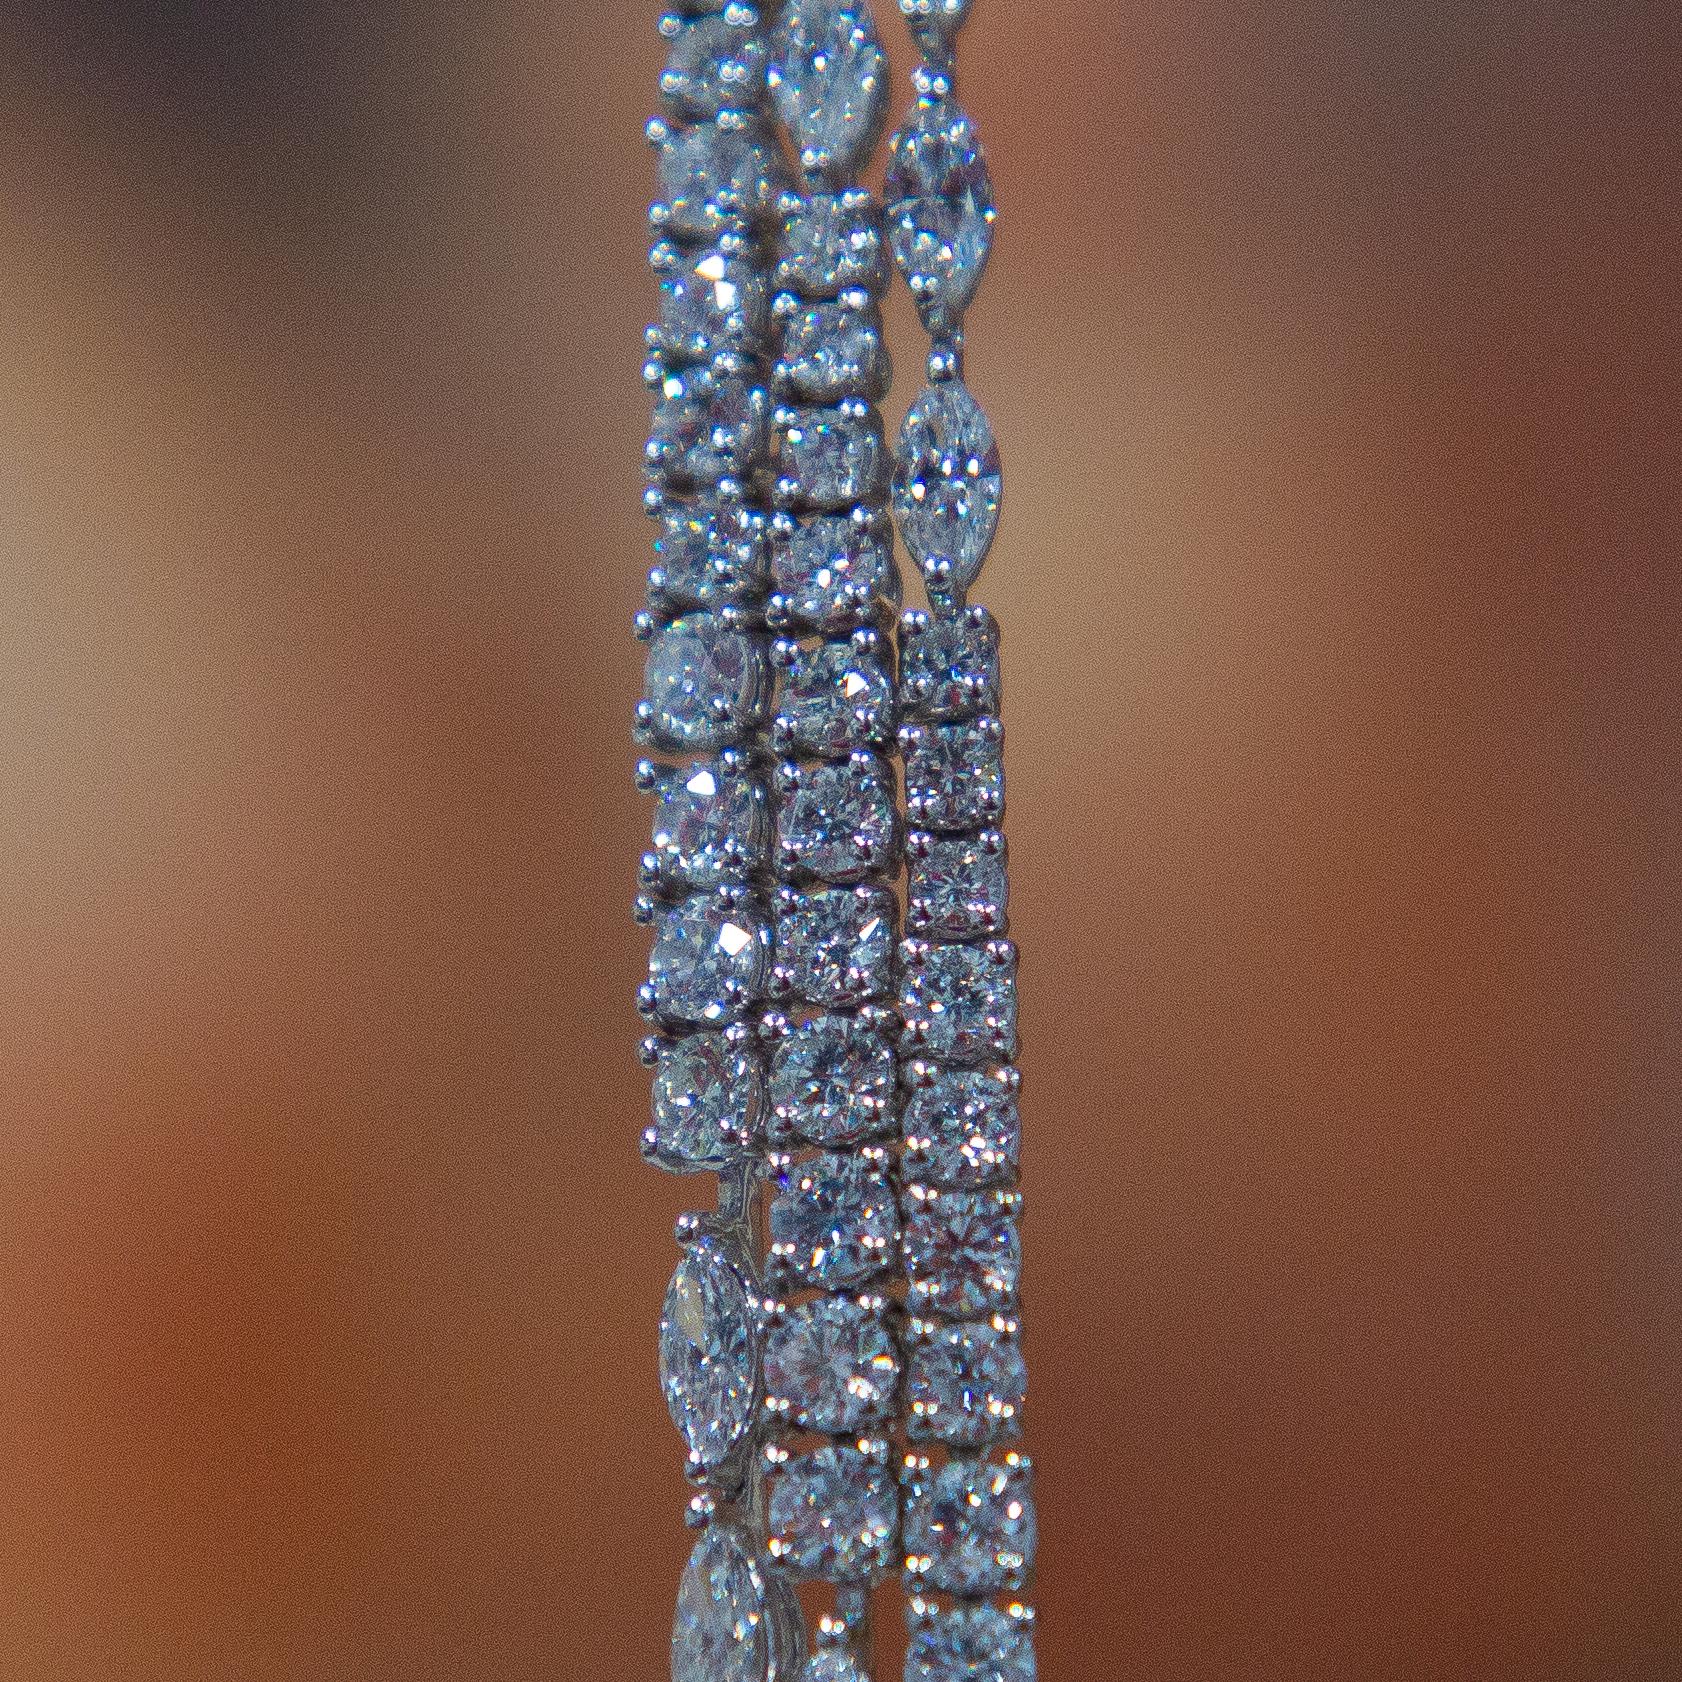 An original one of a kind 18k White Gold necklace drips in elegance with stunning G colour diamonds cut in marquise and round brilliant suites. Strands of diamonds plunge into a tassle, with a total weight of 10.23 carats. Diamonds are collection